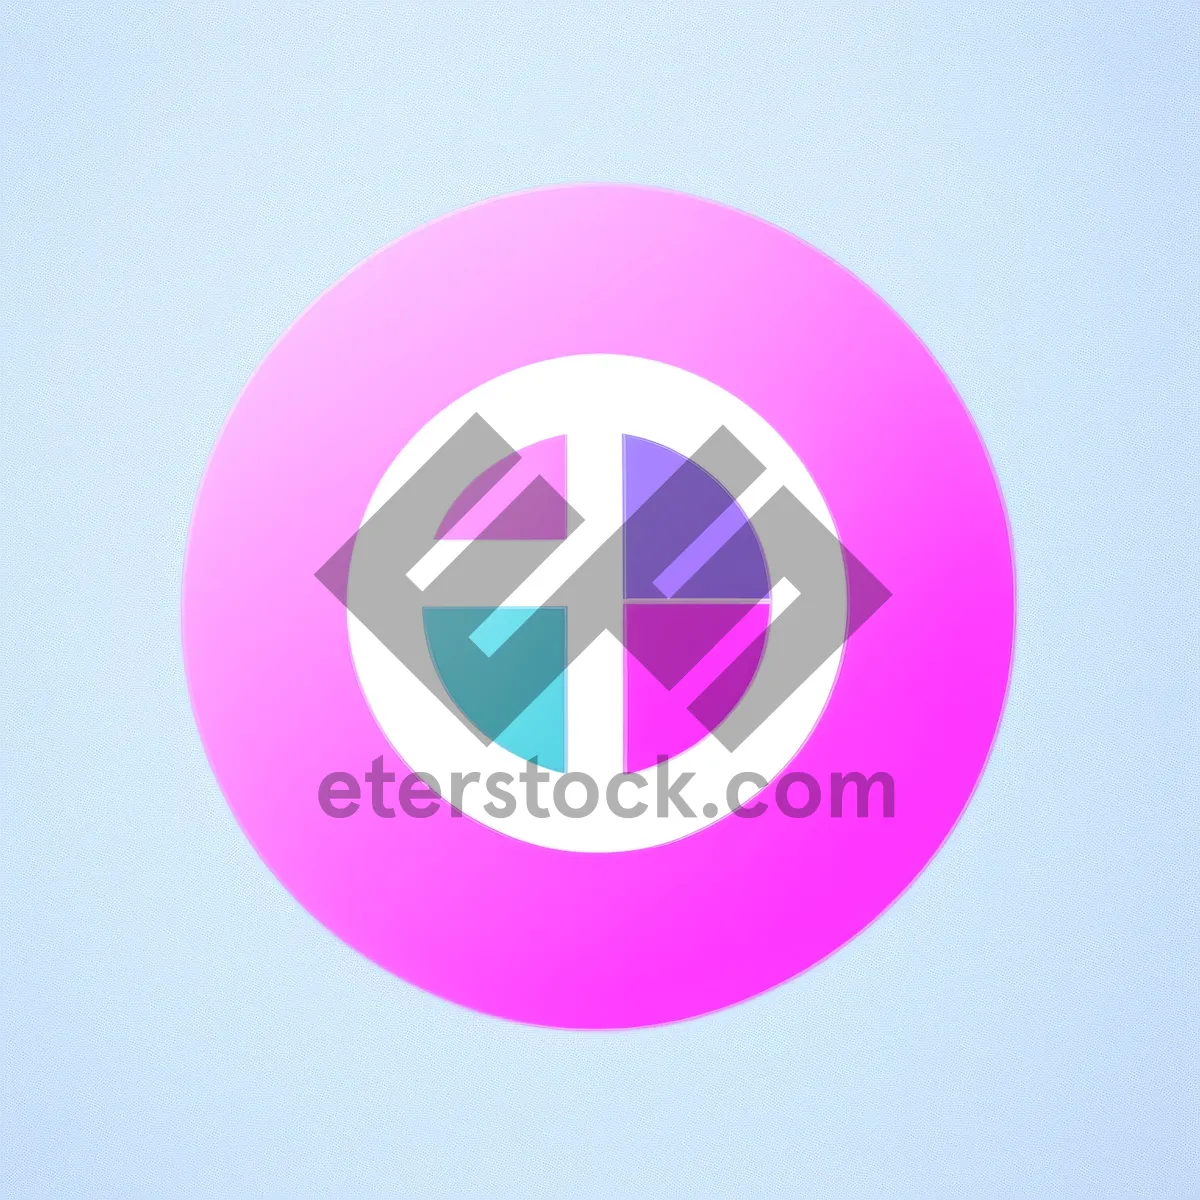 Picture of Shiny Glossy Round Web Buttons